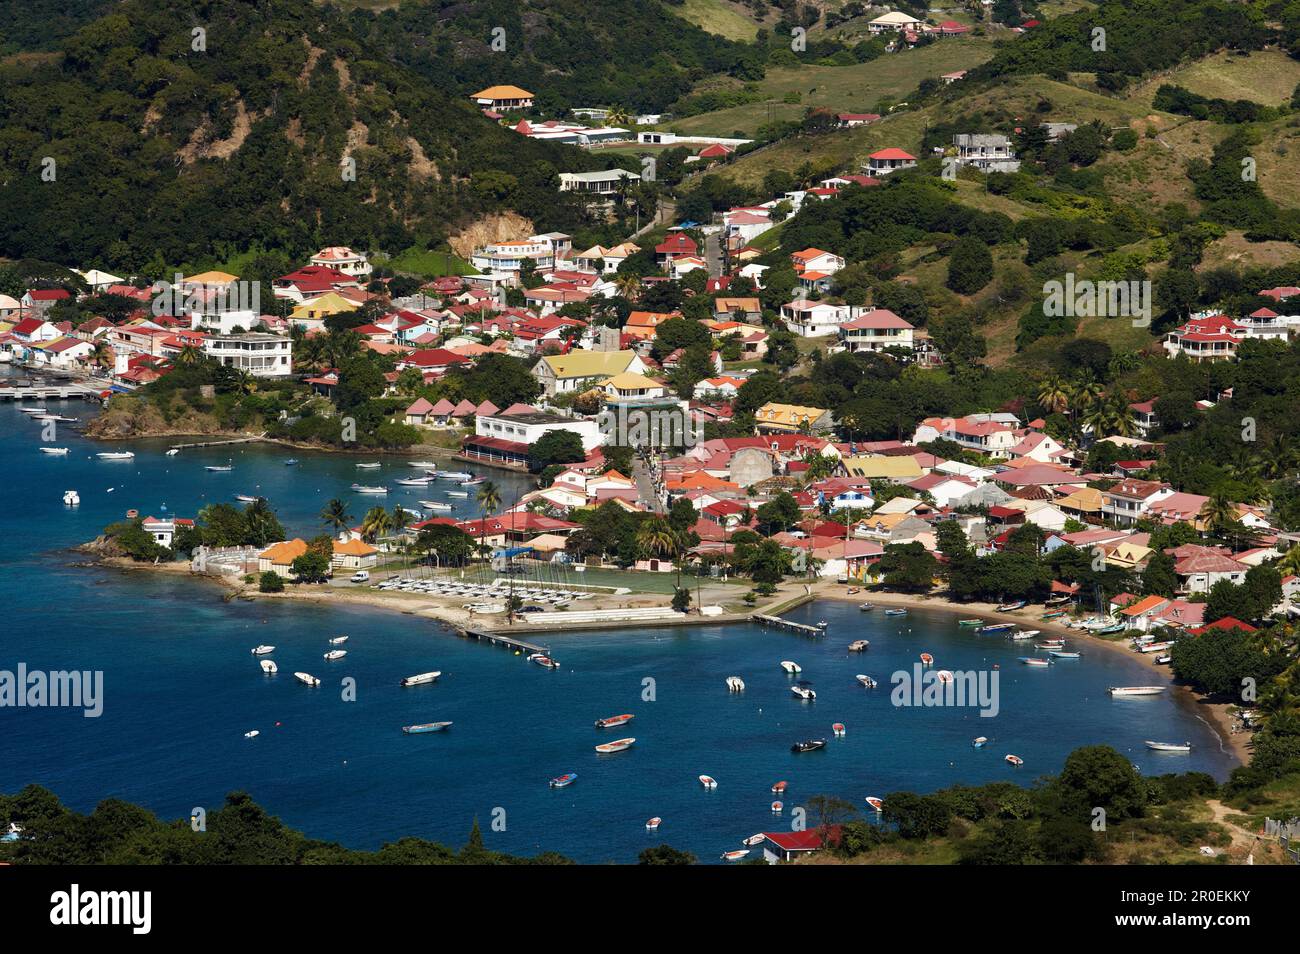 Aerial View of Terre-de-Haute with harbour and bay, Les Saintes Islands, Guadeloupe, Caribbean Sea, America Stock Photo